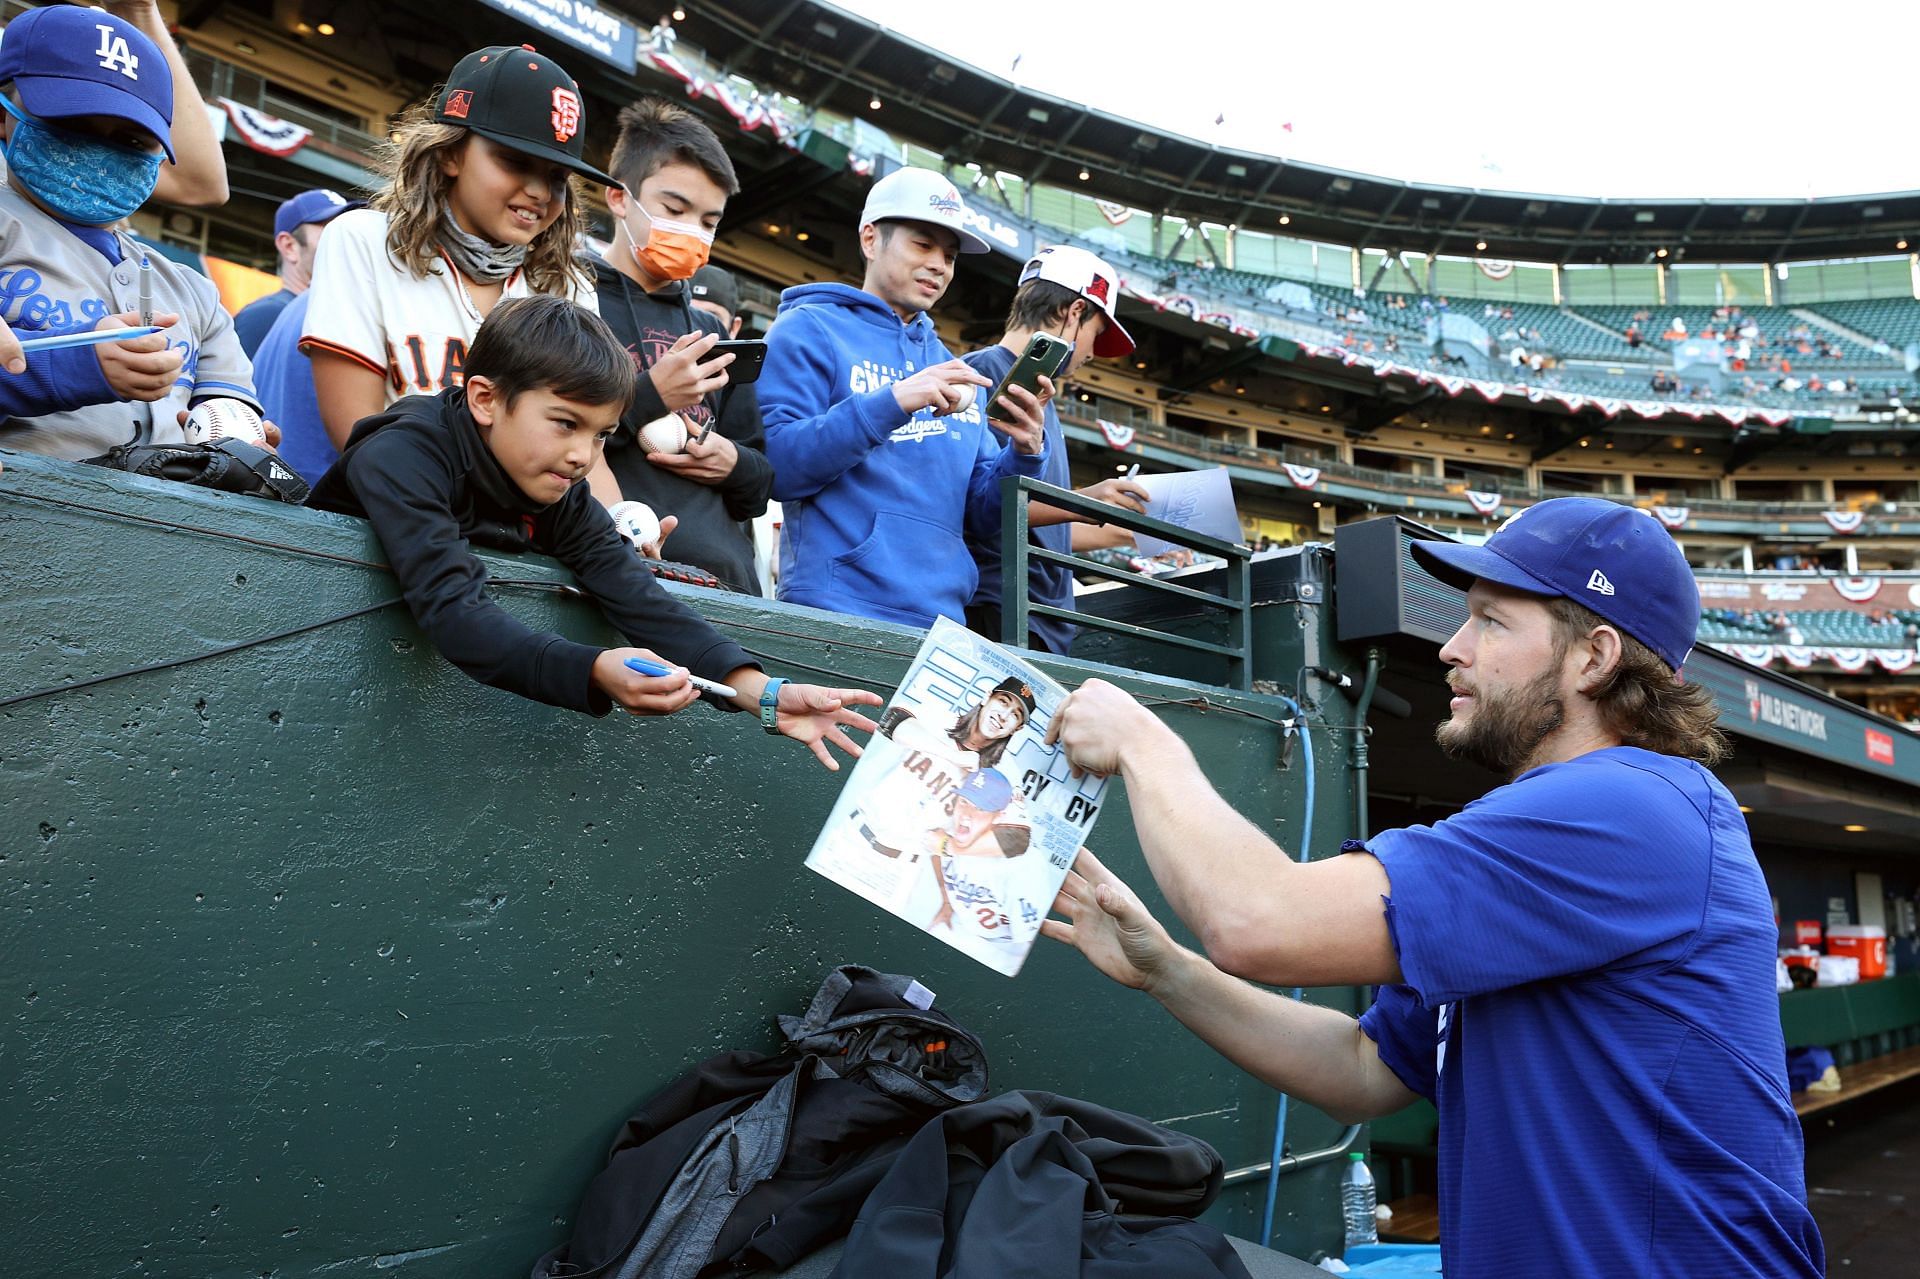 Clayton Kershaw of the Los Angeles Dodgers signs autographs before a game